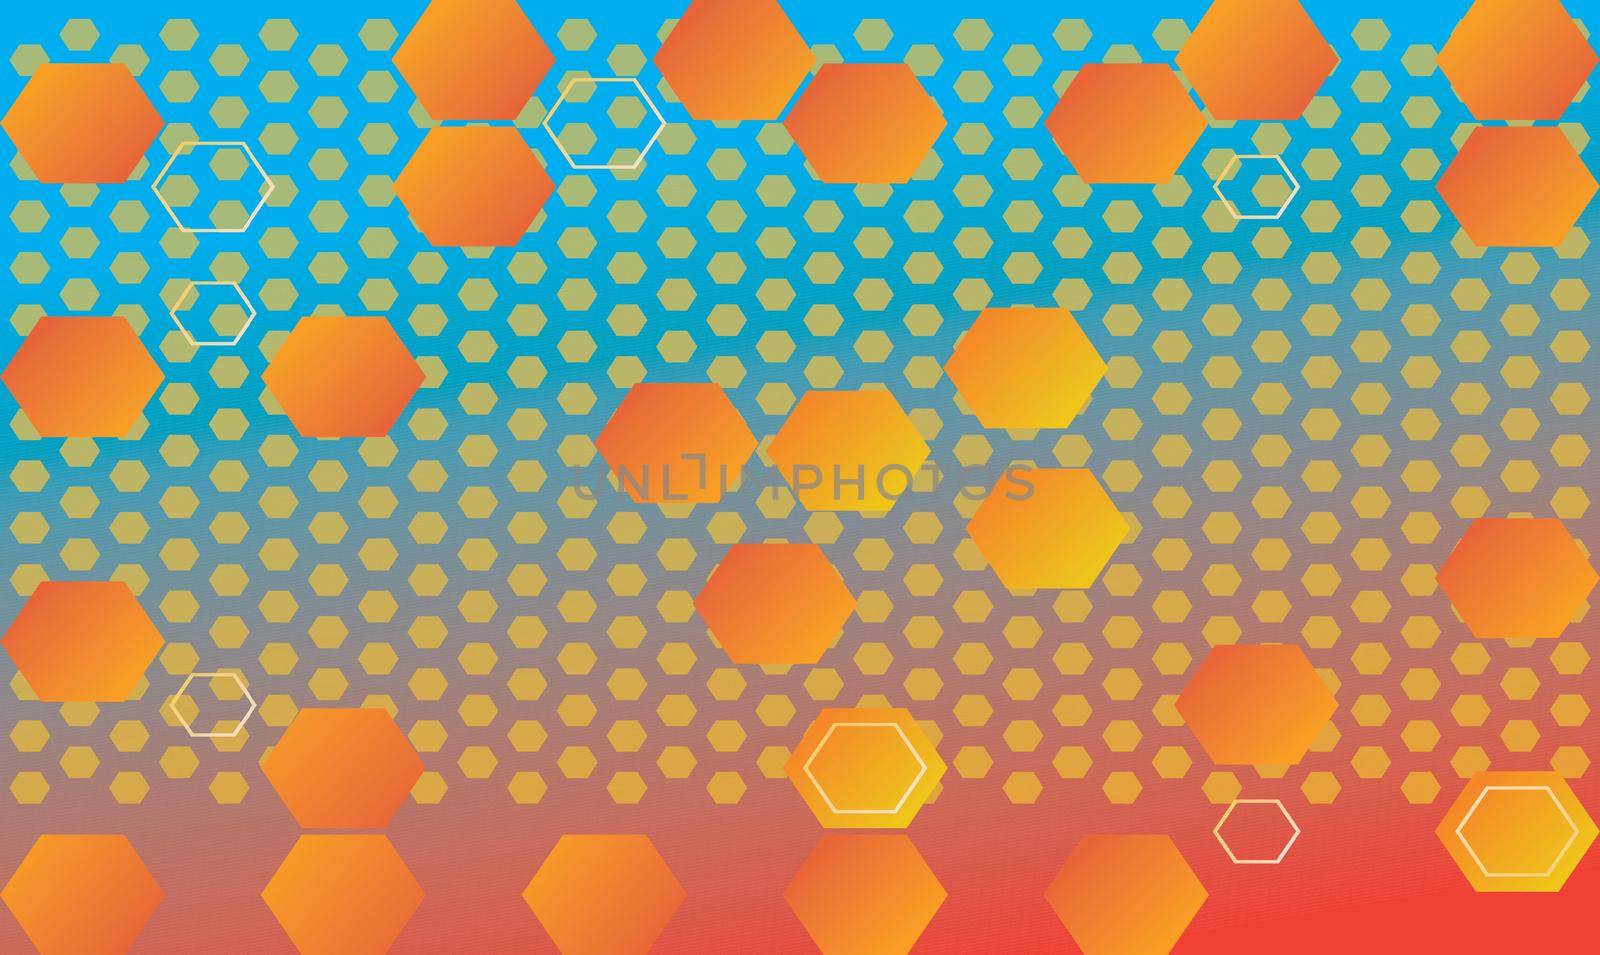 small hexagon on circle dotted background